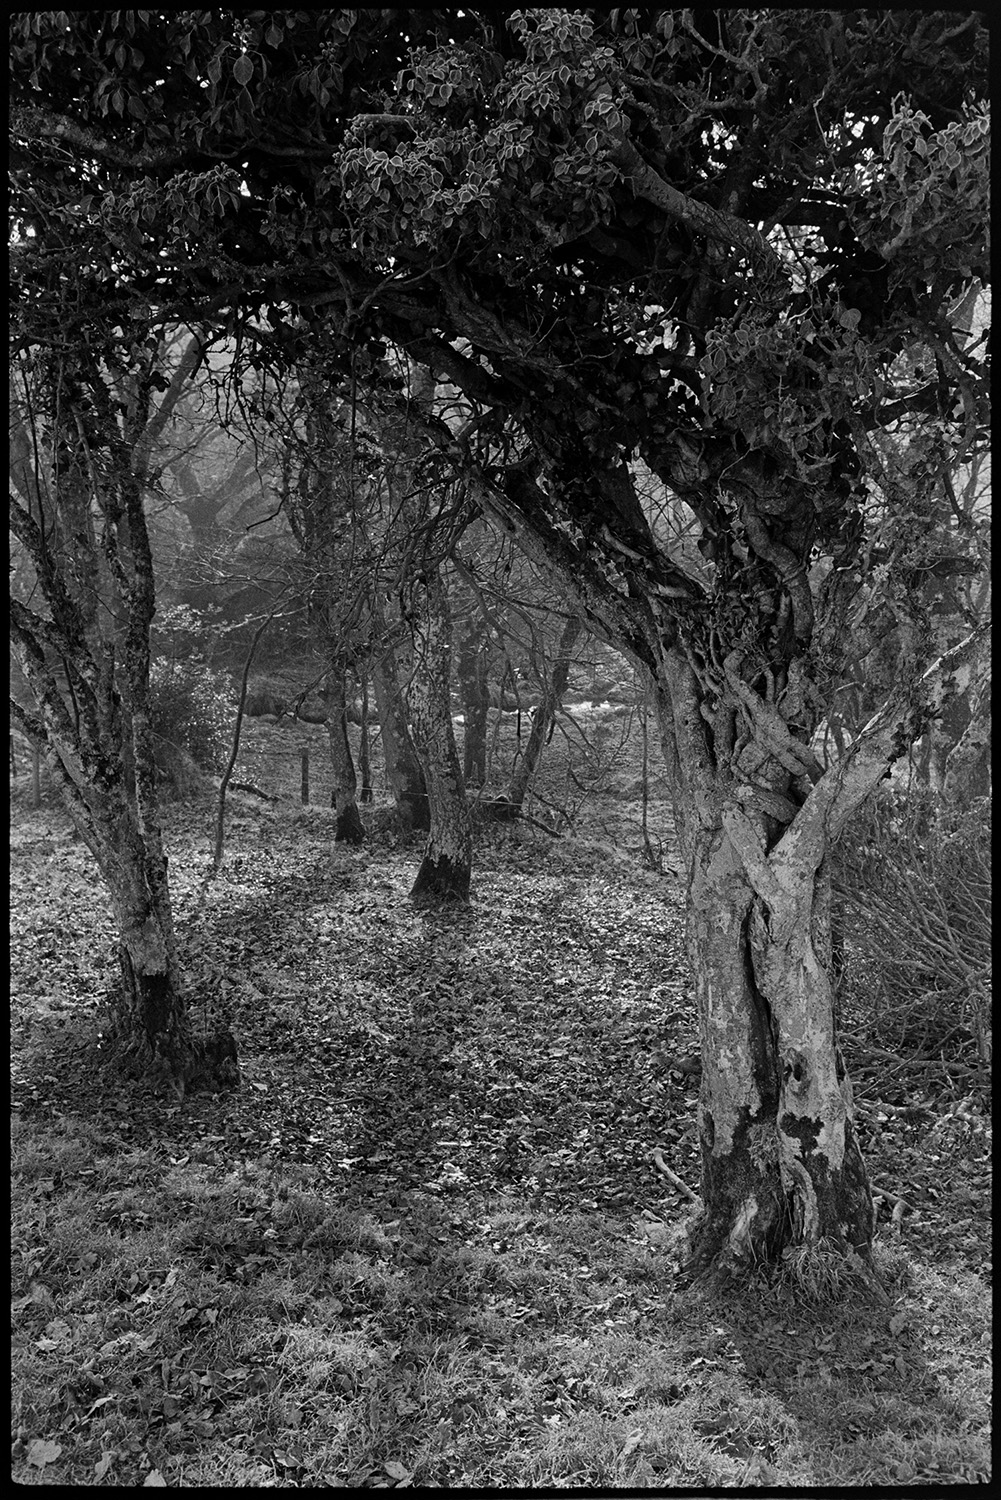 Oak wood early morning light. 
[An oak woodland near Hollocombe Moor, in the early morning. Some of the tree trunks are twisted.]